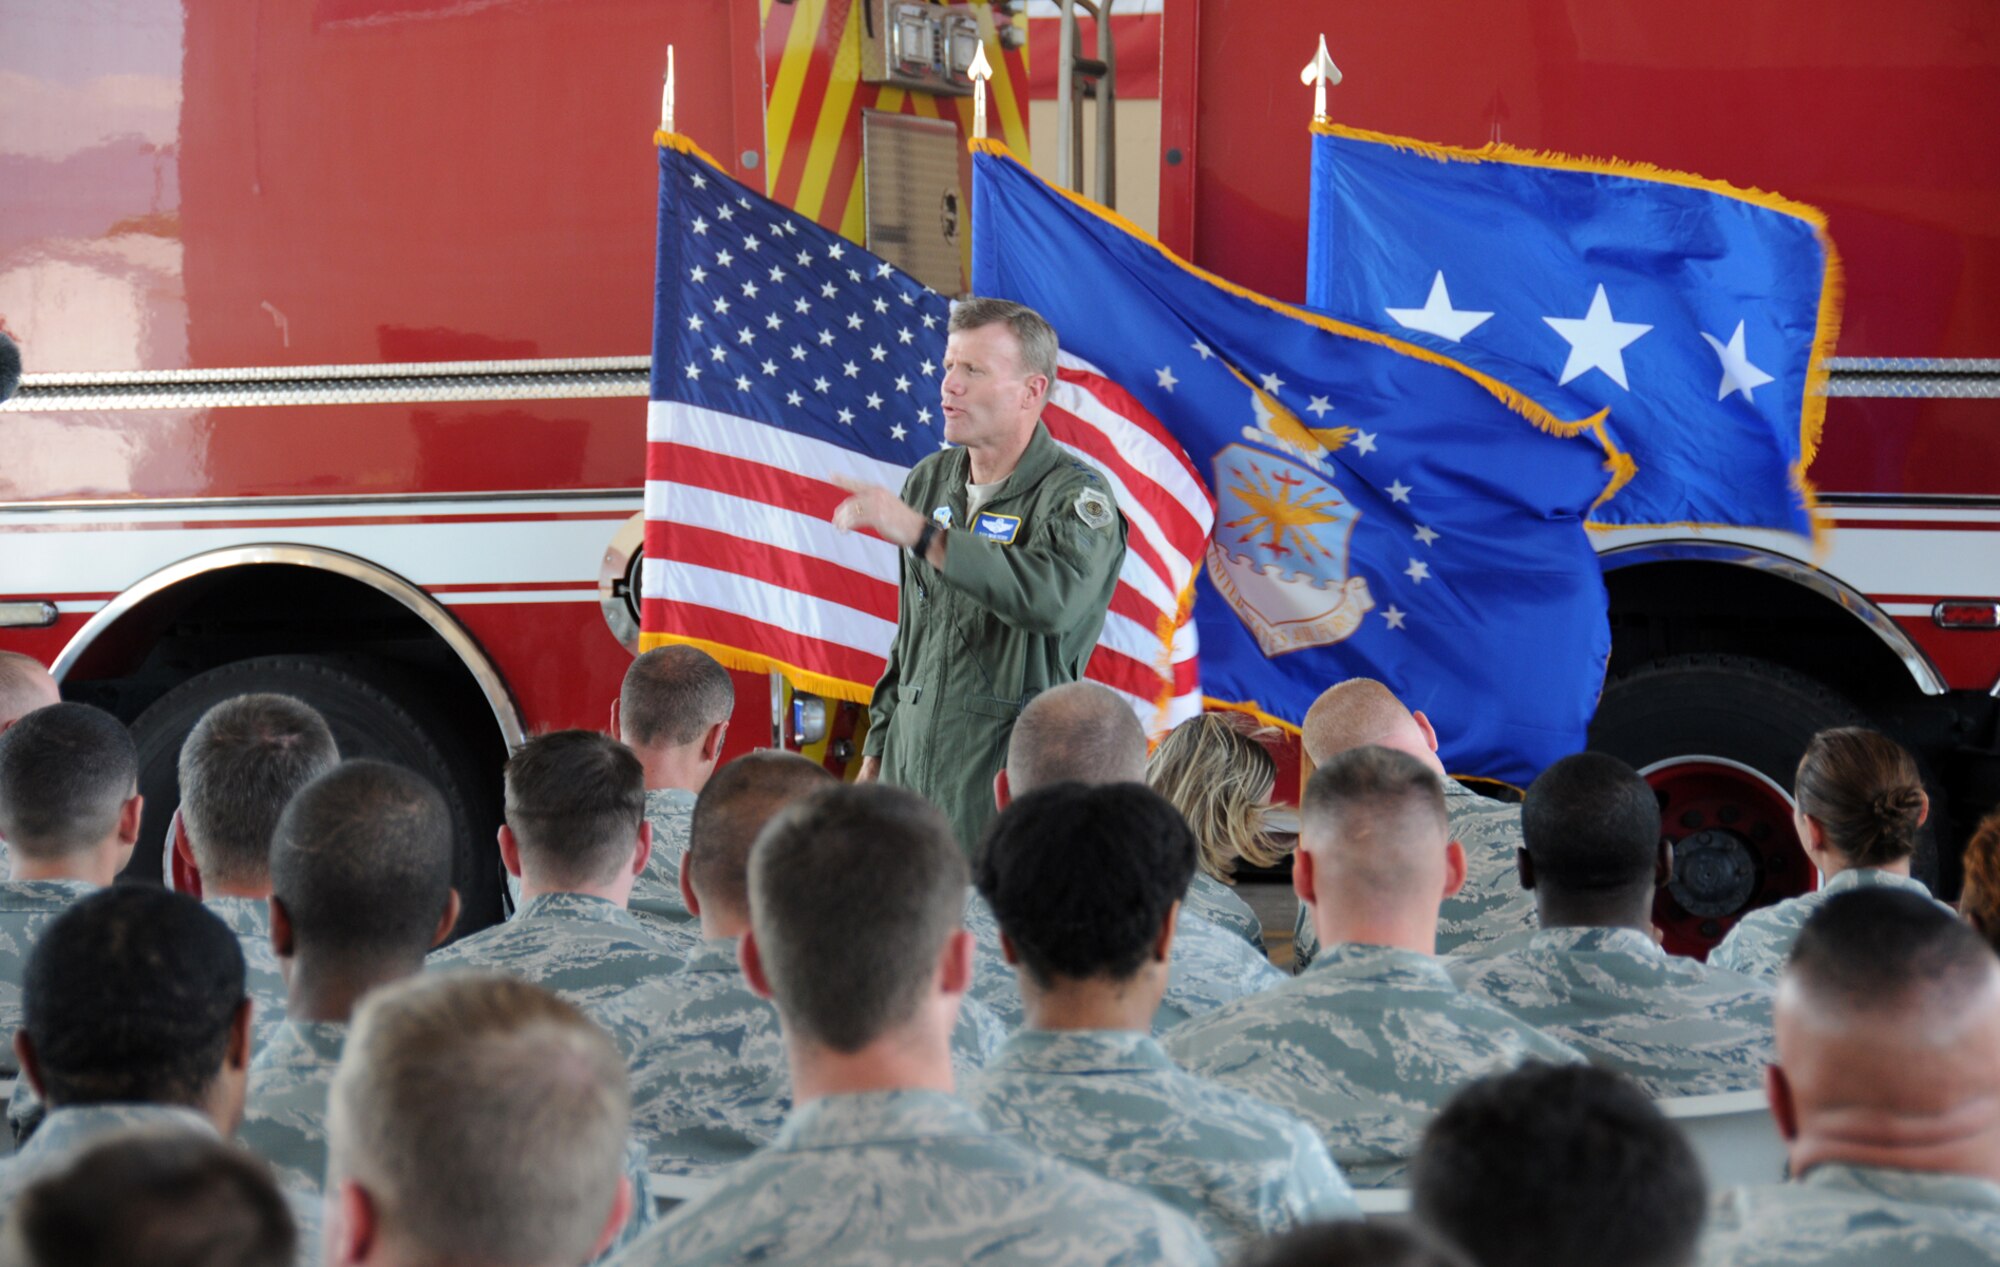 U. S. Air Force Lt. Gen. Tod Wolters, 12th Air Force commander, speaks to the all call group about his operational styles of trust, training and teamwork in the fire station at Soto Cano Air Base, Honduras March 20, 2014.  (Photo by U. S. Air National Guard Capt. Steven Stubbs)